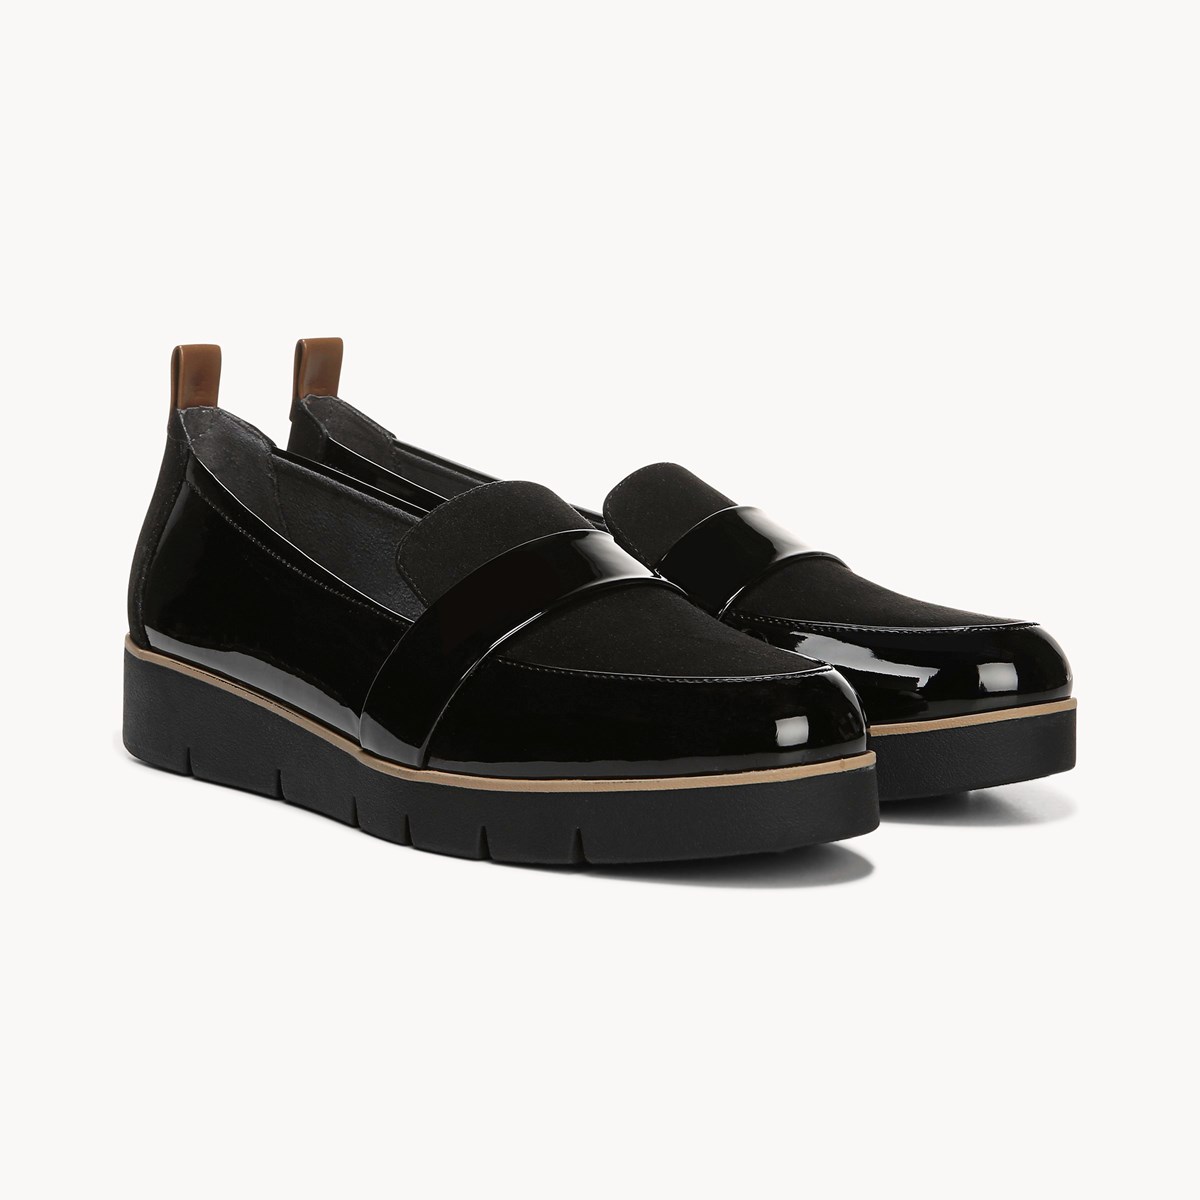 American Lifestyle Webster Loafer in 